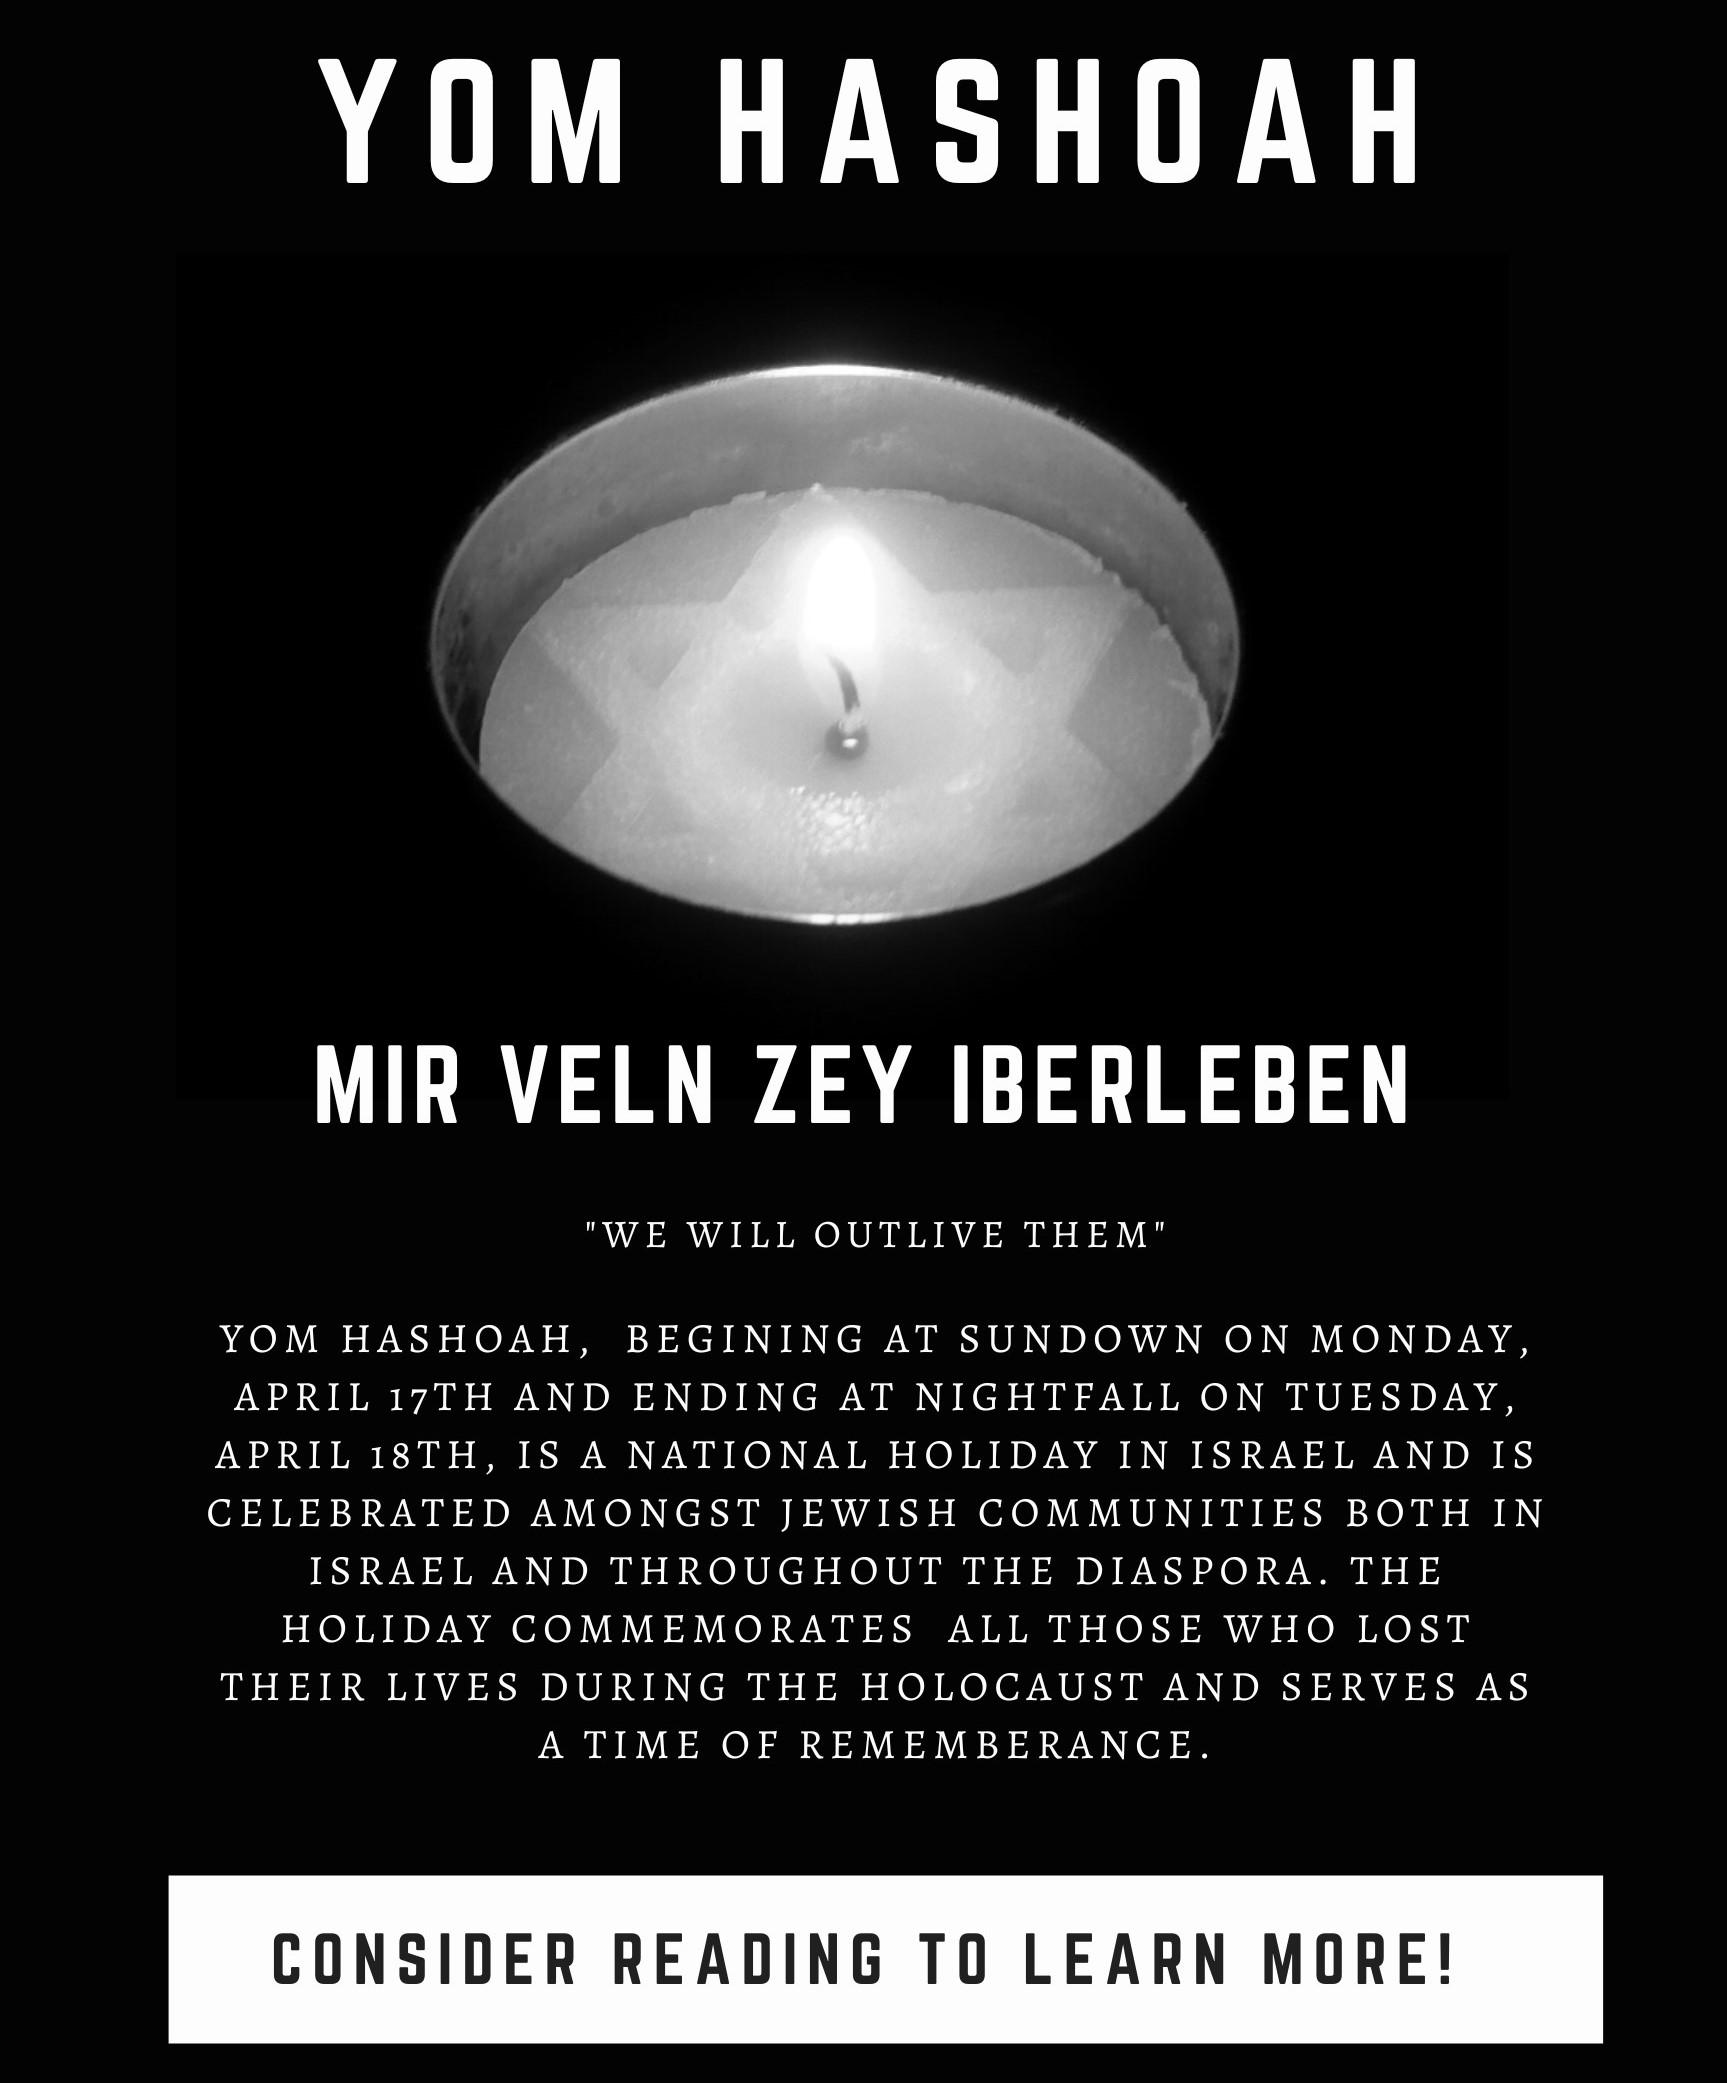 Yom HaShoah - Mir Veln Zey Iberleben, "We will outlive them." Yom Ha-Shoah, beginnging at sundwon on Monday, April 17th and ending at nightfall on Tuesday, April 18th, is a national holiday in Israel and is celebrated amongst Jewish communities both in Israel and throughout the diaspora. The holiday commemorates all those who lost their lives during the Holocaust and serves as a time of remembrance.